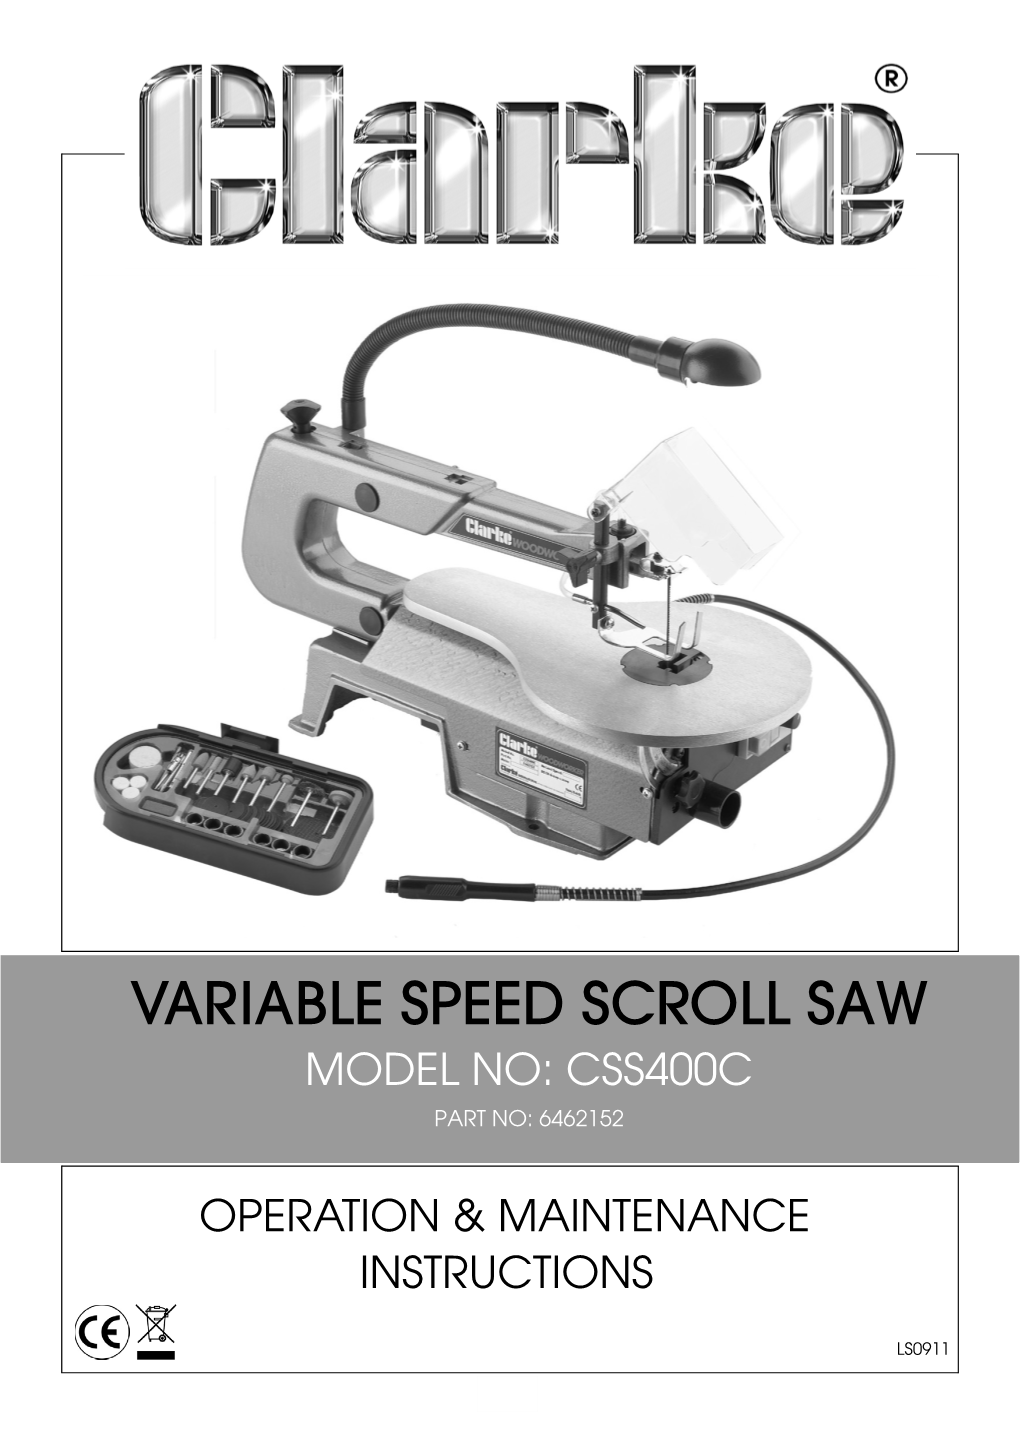 Variable Speed Scroll Saw Model No: Css400c Part No: 6462152